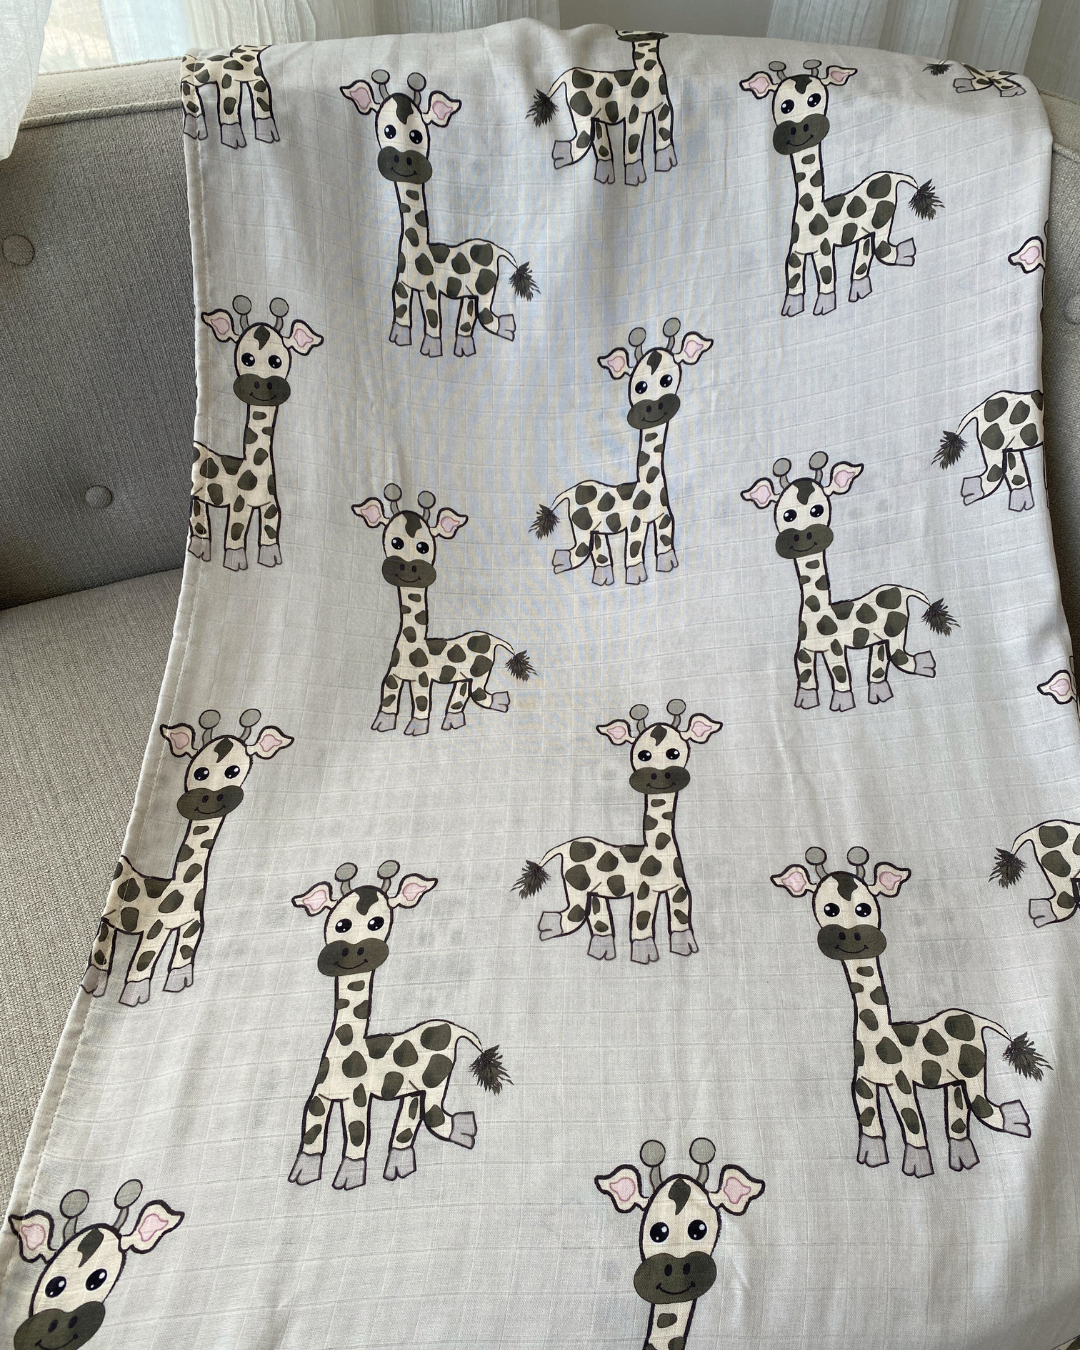 Muslin Swaddle: The Laughing Giraffes